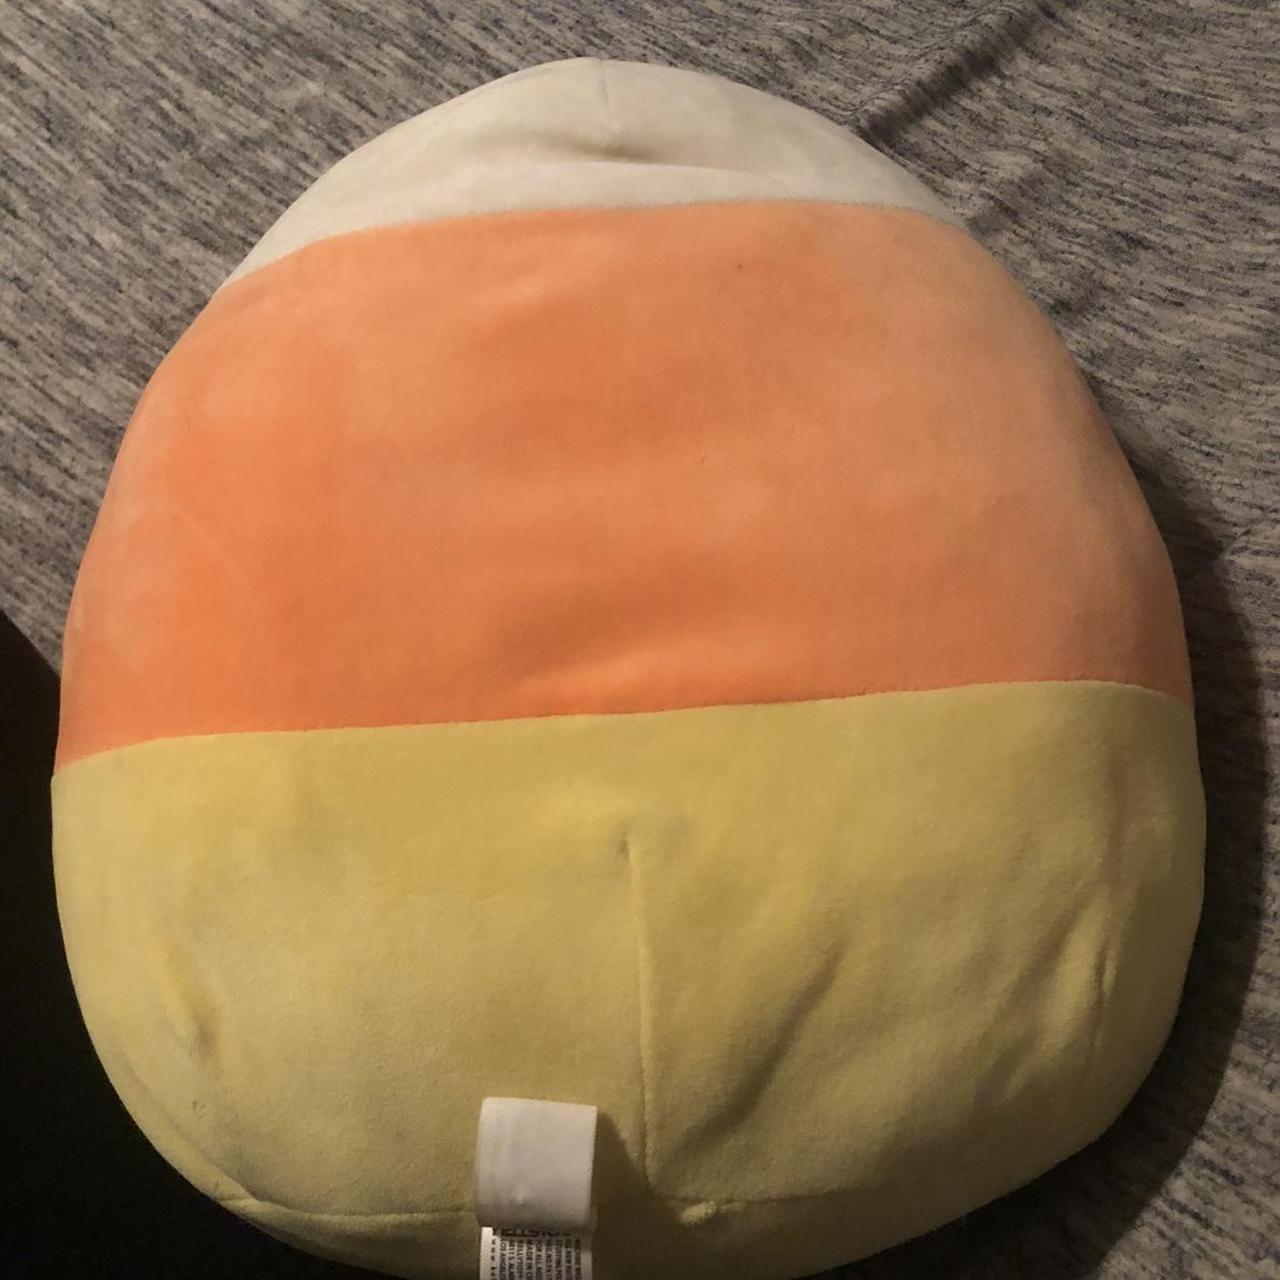 Product Image 2 - 2019 12in cannon squishmallow

new with